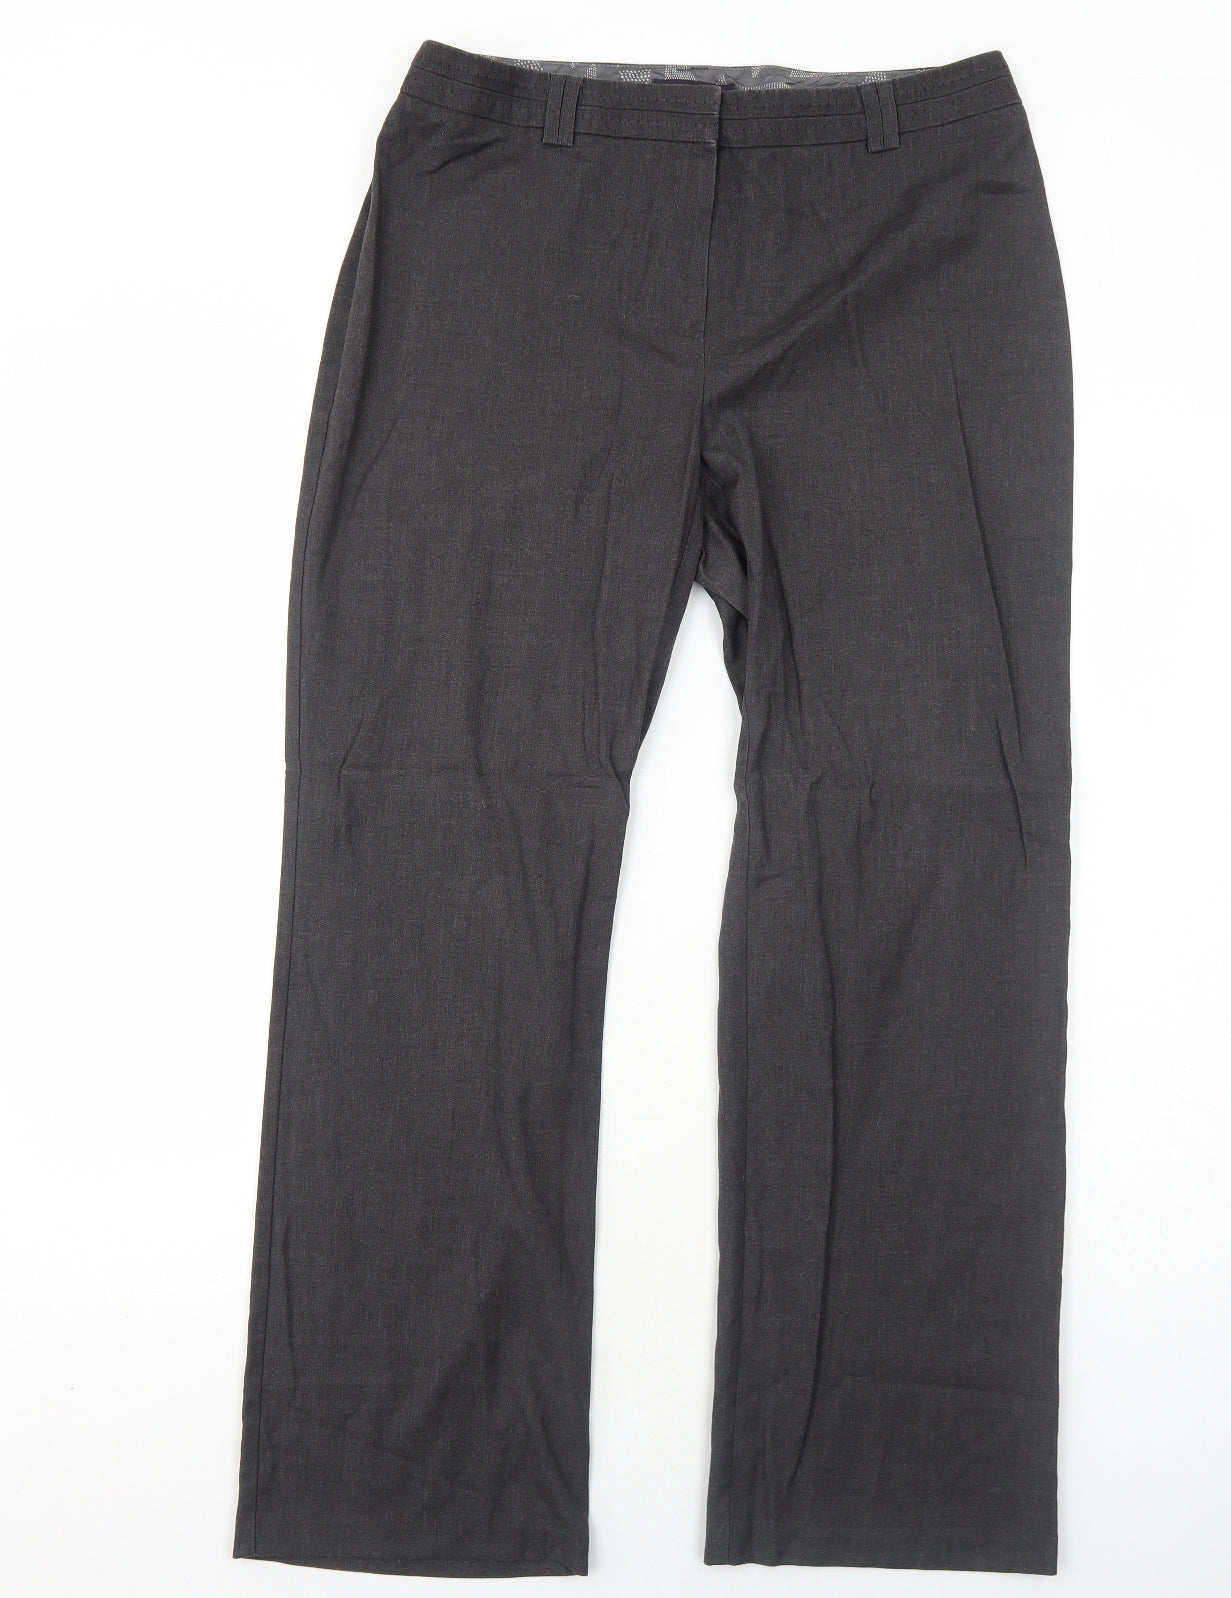 Marks and Spencer Womens Grey Polyester Dress Pants Trousers Size 14 Regular Zip